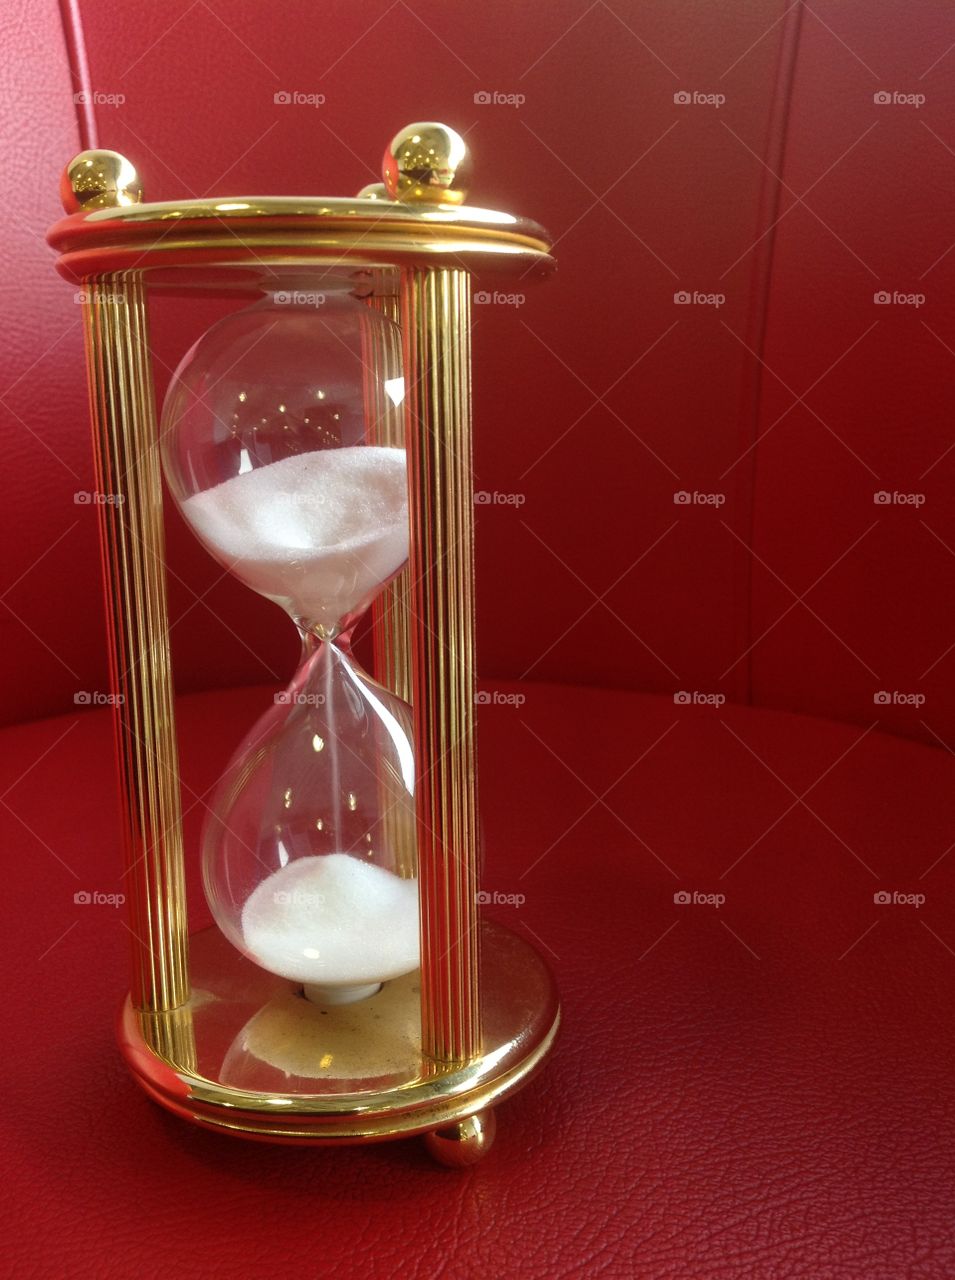 Hour glass with red background